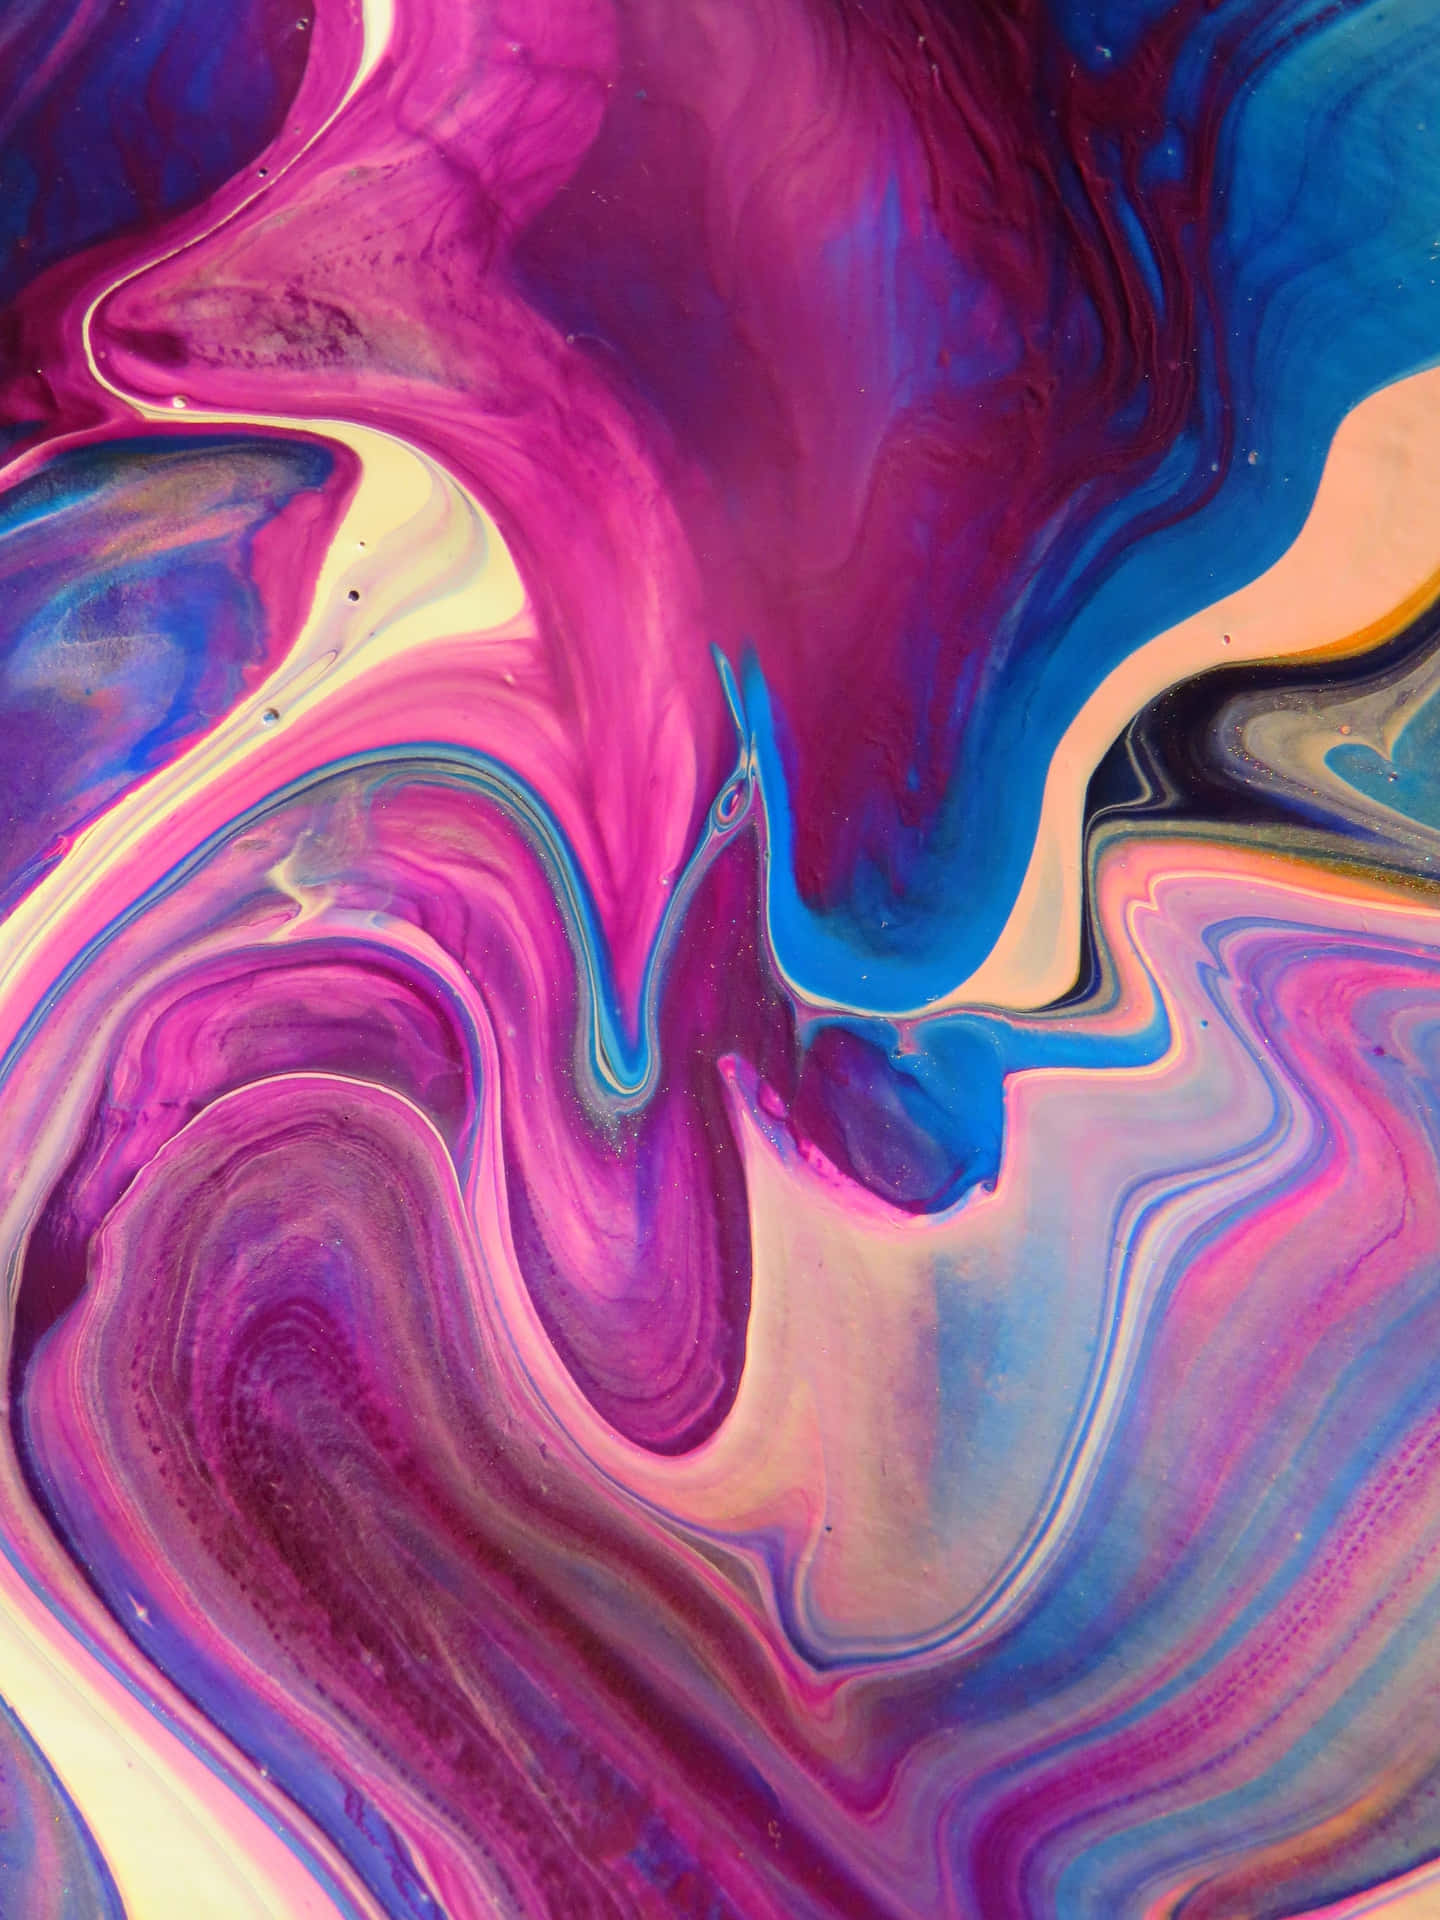 A Colorful Abstract Painting With Swirls Of Purple, Blue, And Pink Background